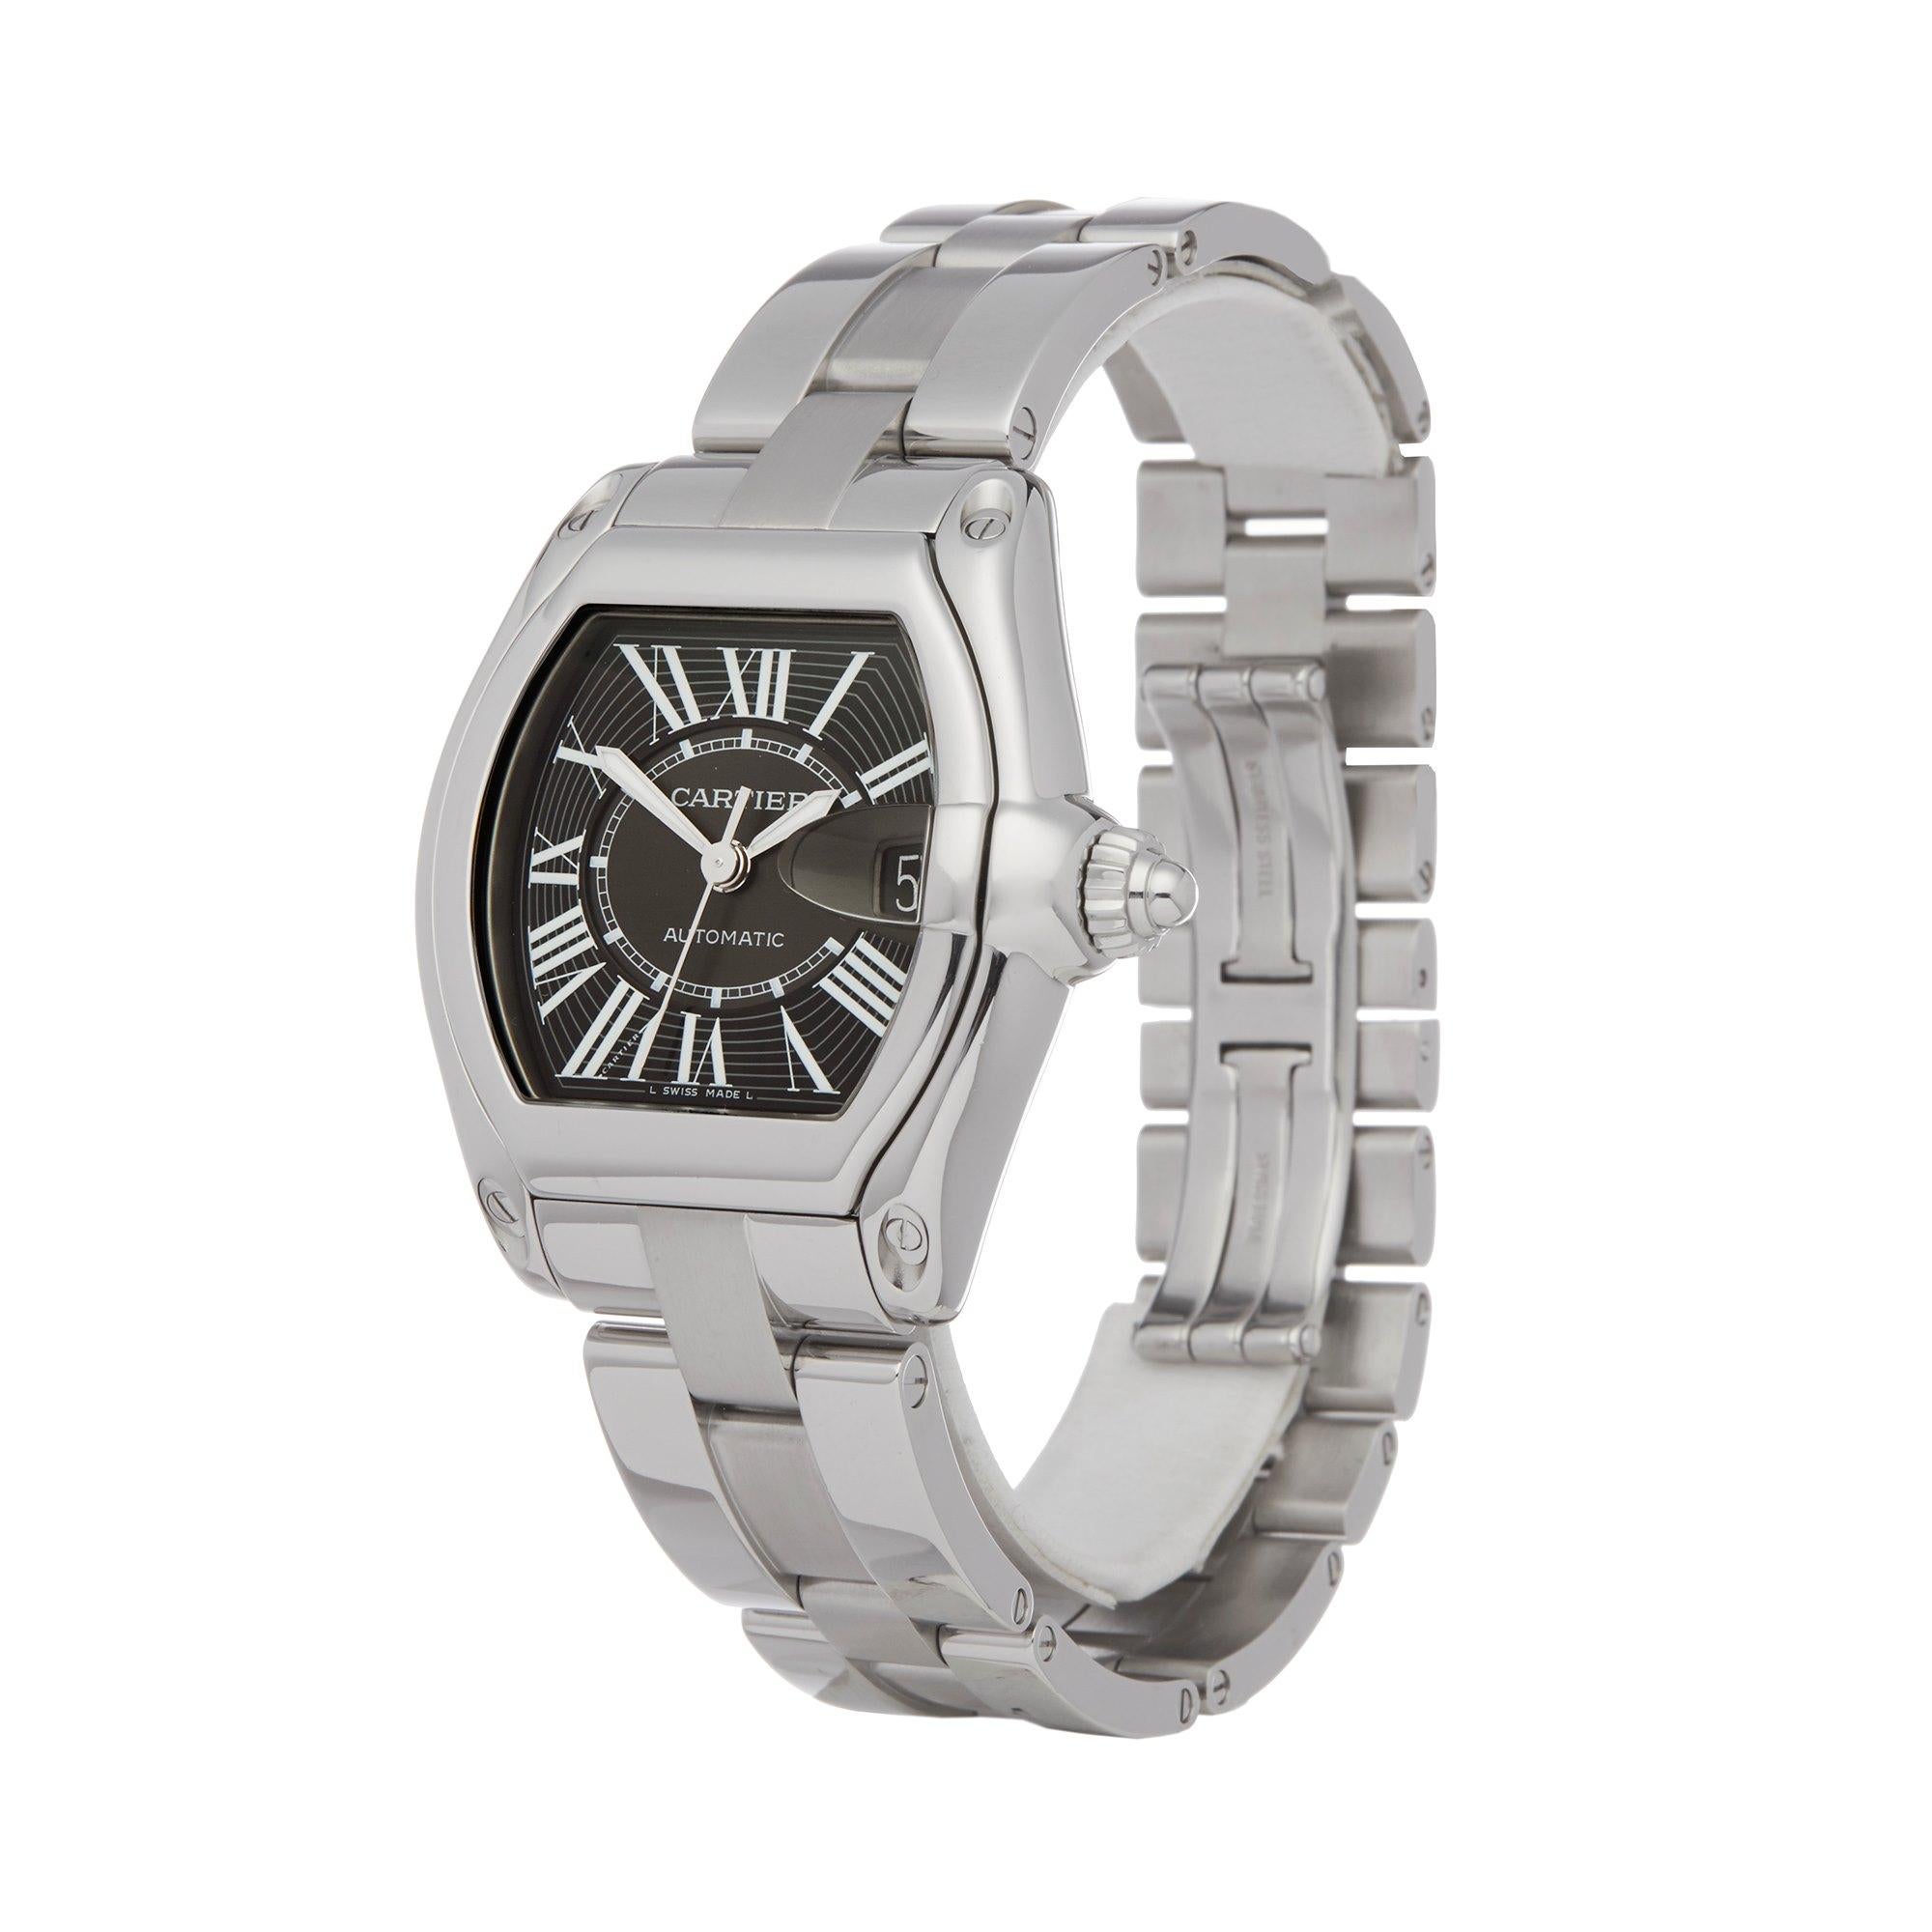 Xupes Reference: W007560
Manufacturer: Cartier
Model: Roadster
Model Variant: 
Model Number: 2510
Age: 25-12-2005
Gender: Men
Complete With: Cartier Box, Manual, Guarantee, Spare Strap & Service Card Dated 7th November 2019
Dial: Black Roman
Glass: